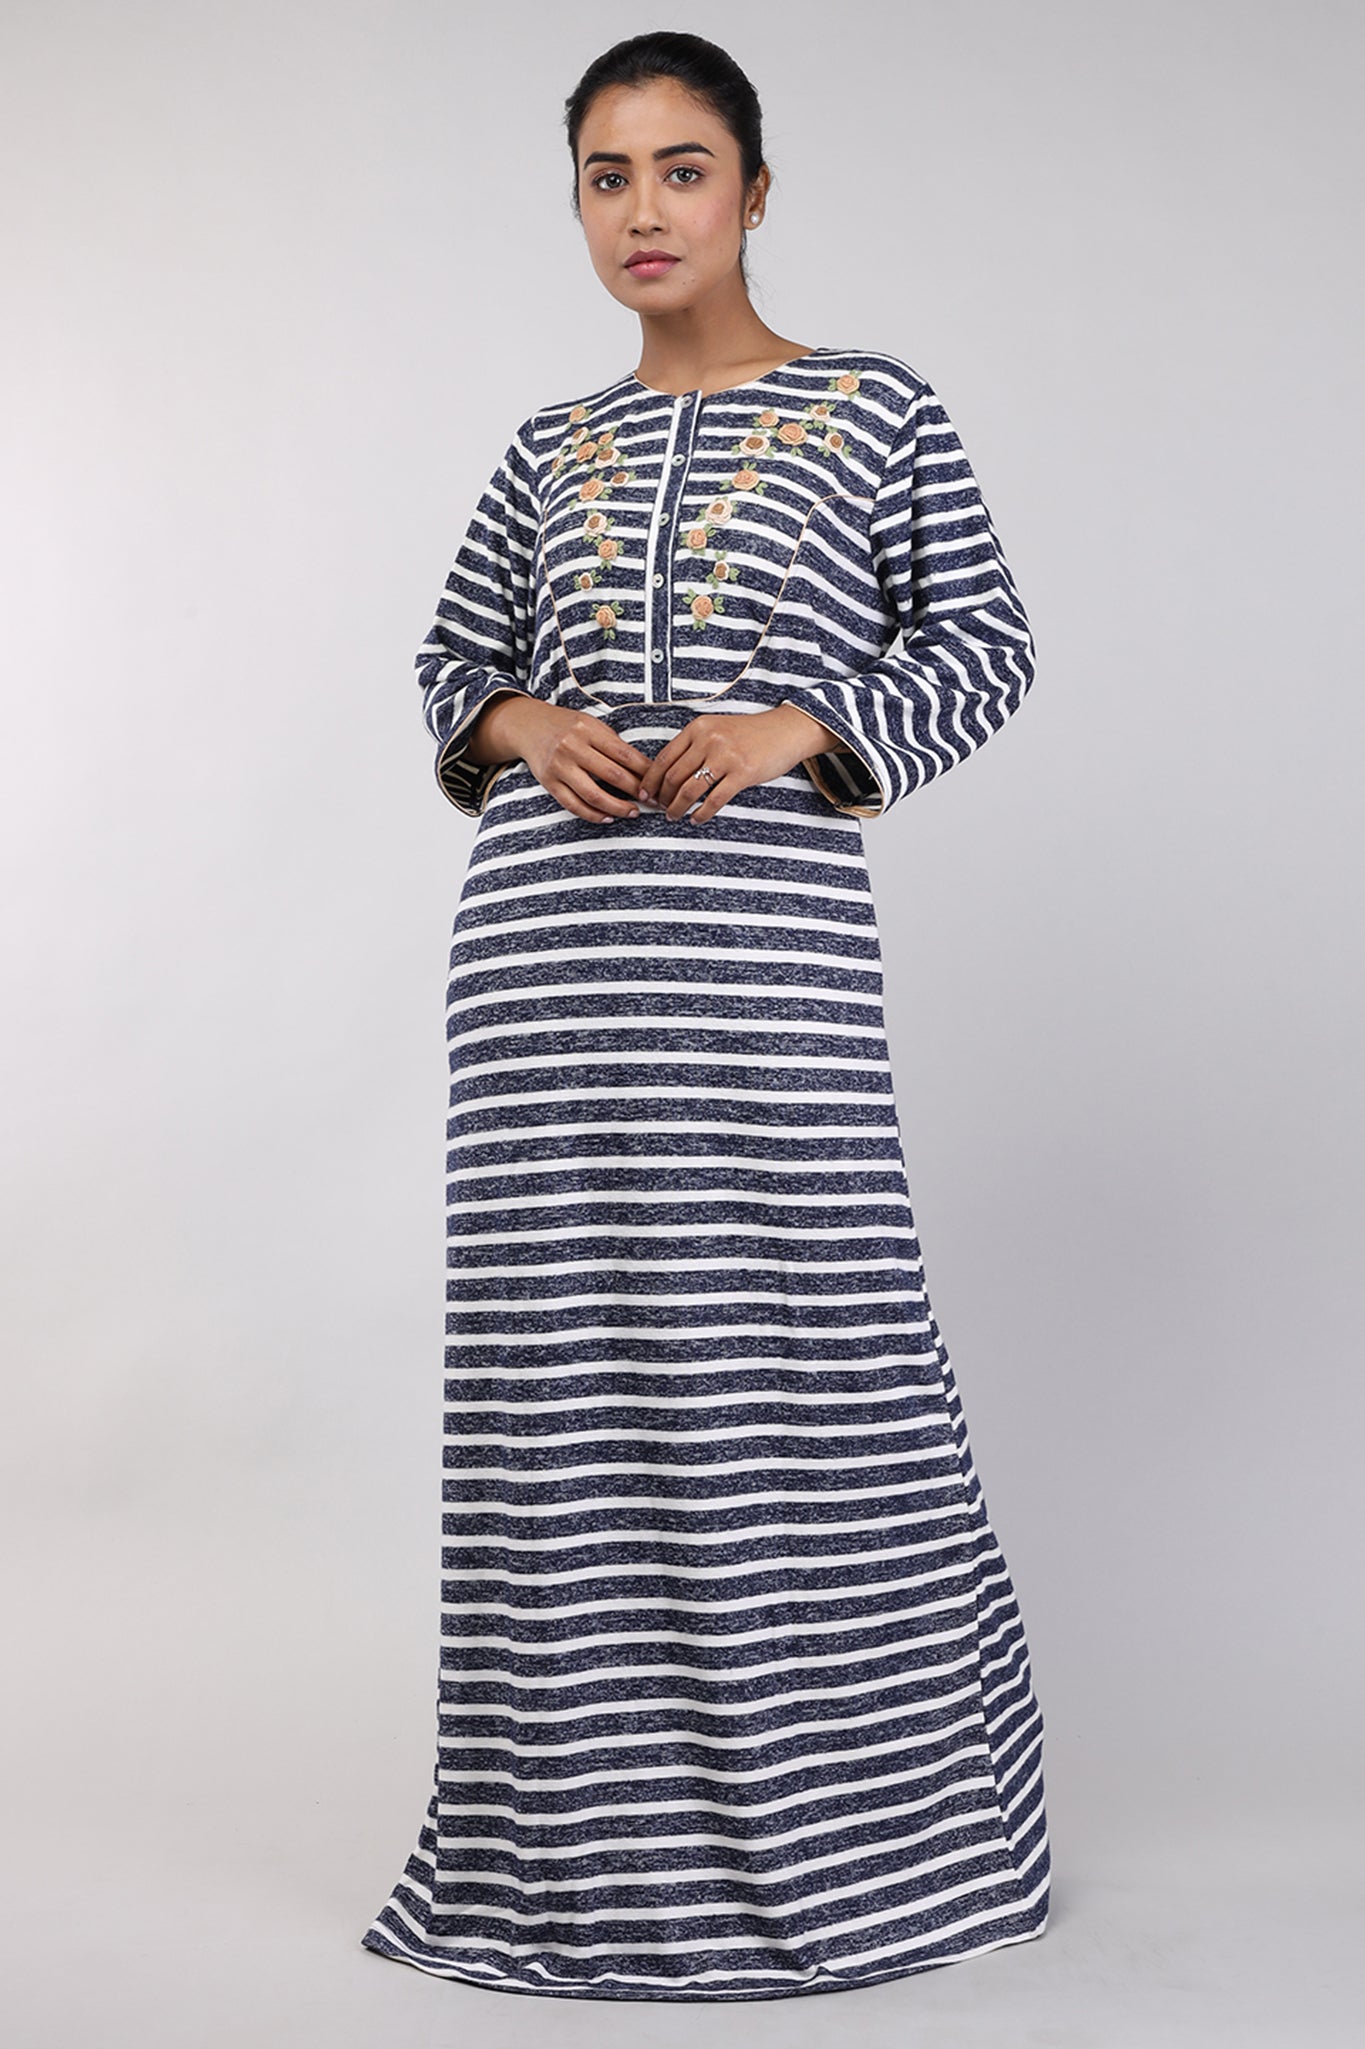 Women Navy Blue Stripes Hand Embroidery Knitted Winter Nighty